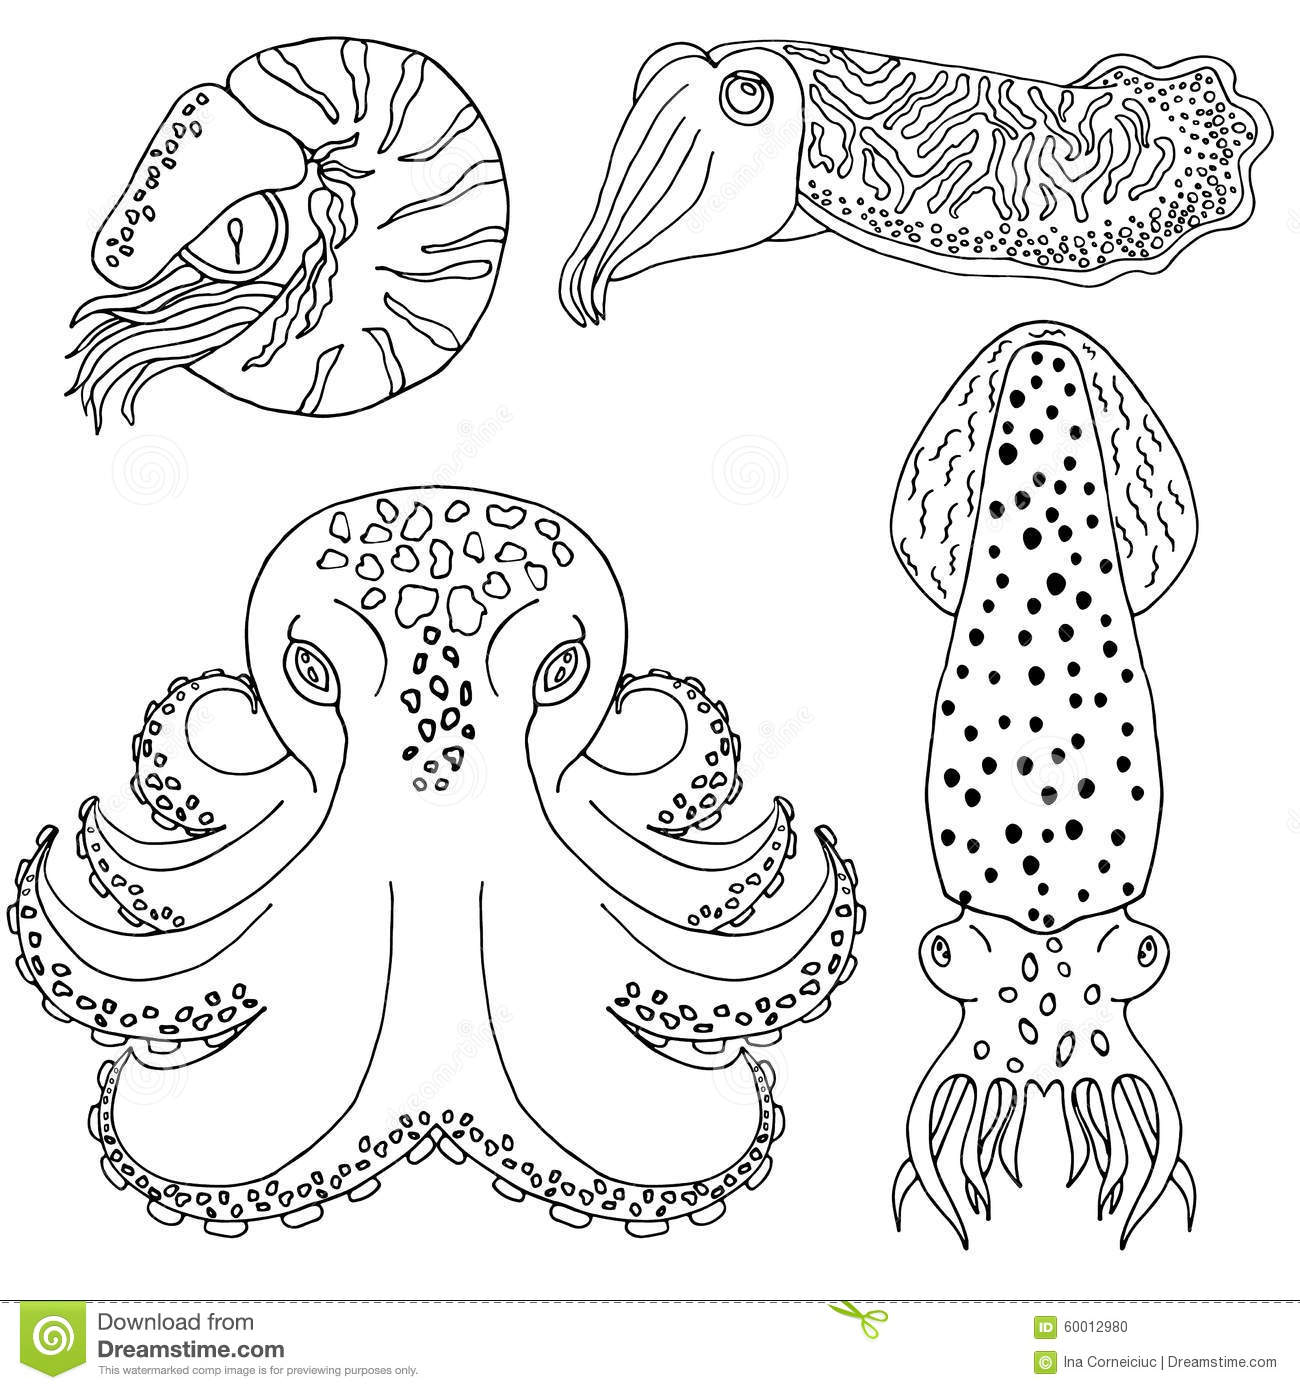 Cuttlefish coloring #6, Download drawings